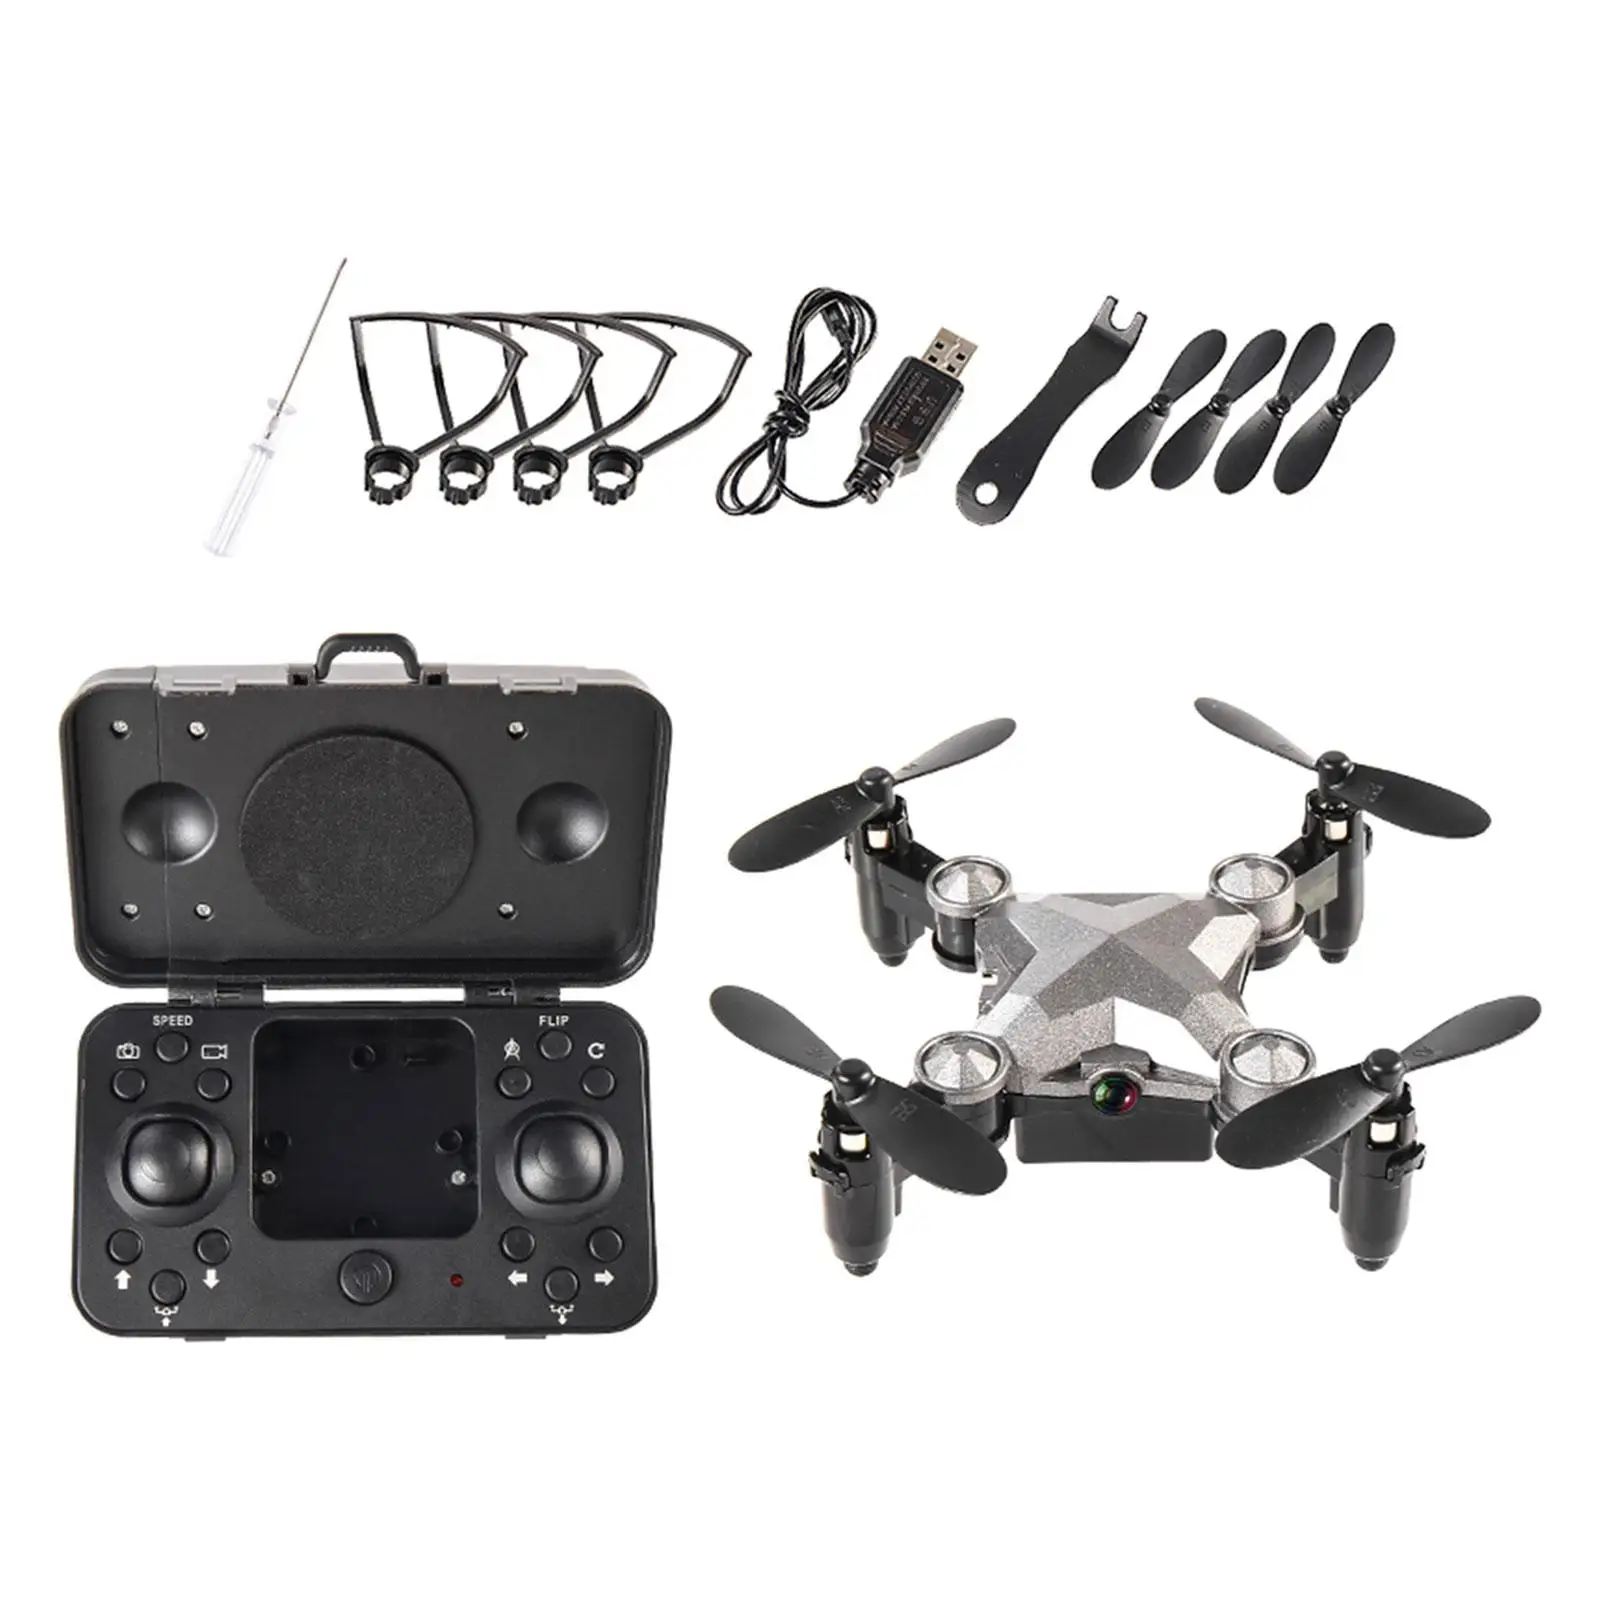 Mini Drone 720 Camera WiFi Real Time Transmission 4 Channels Portable RC Aircraft for Birthday Gift Helicopter Toys Children